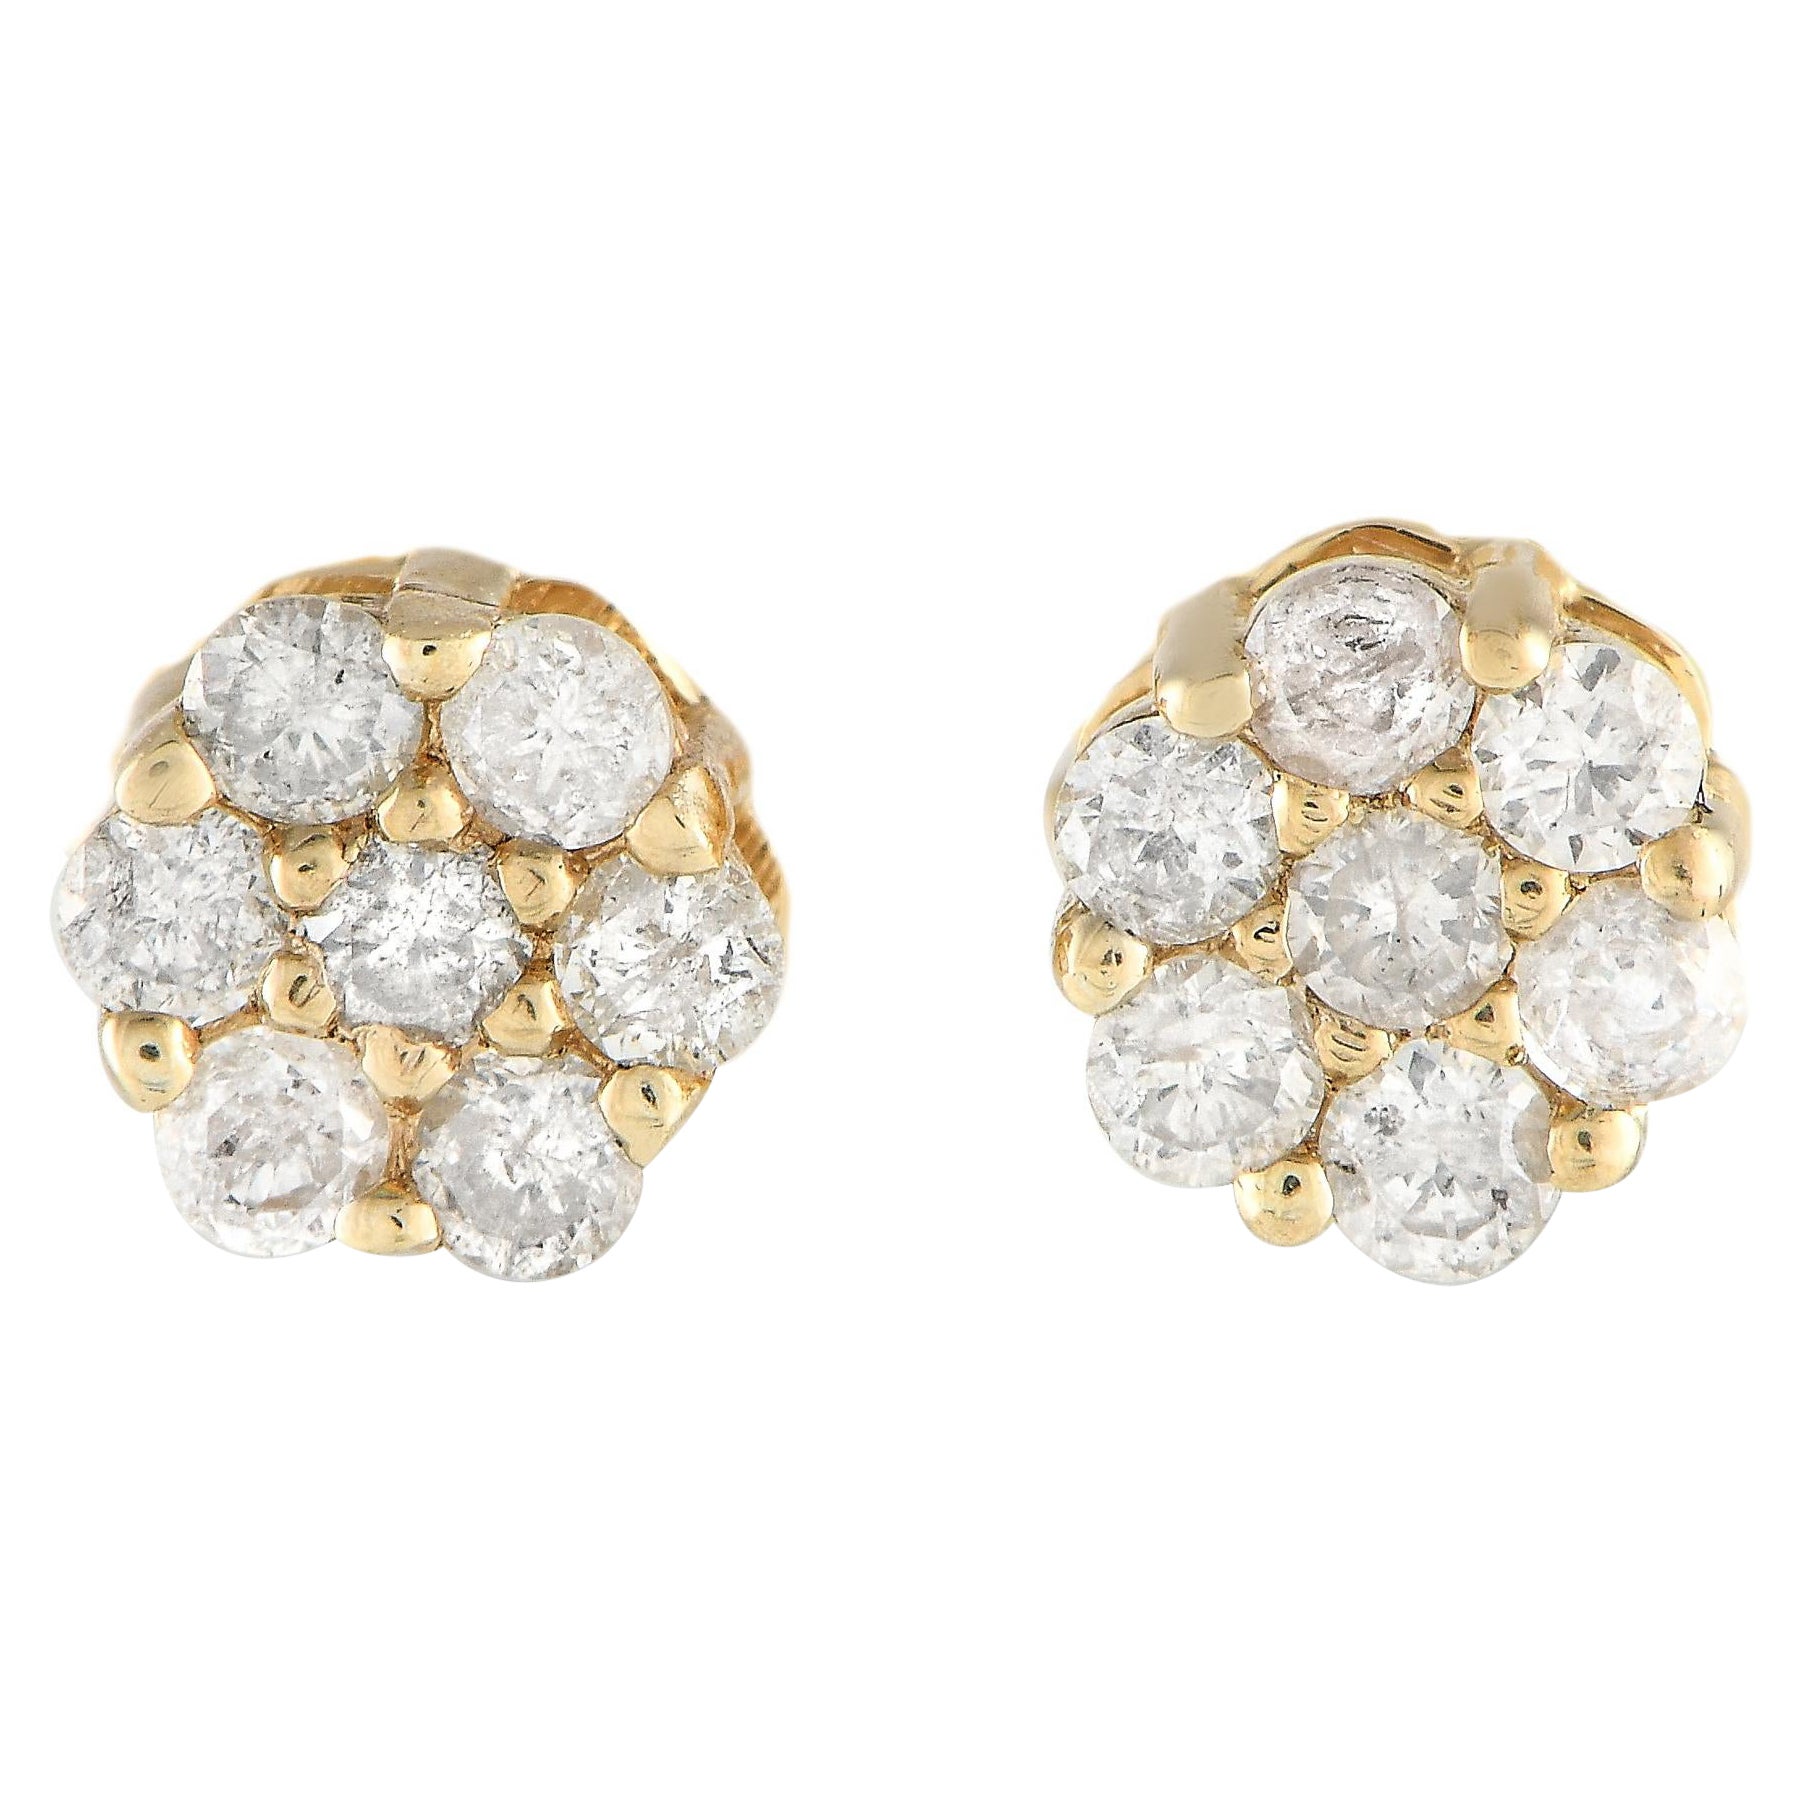 LB Exclusive 14K Yellow Gold 0.25ct Diamond Cluster Stud Earrings